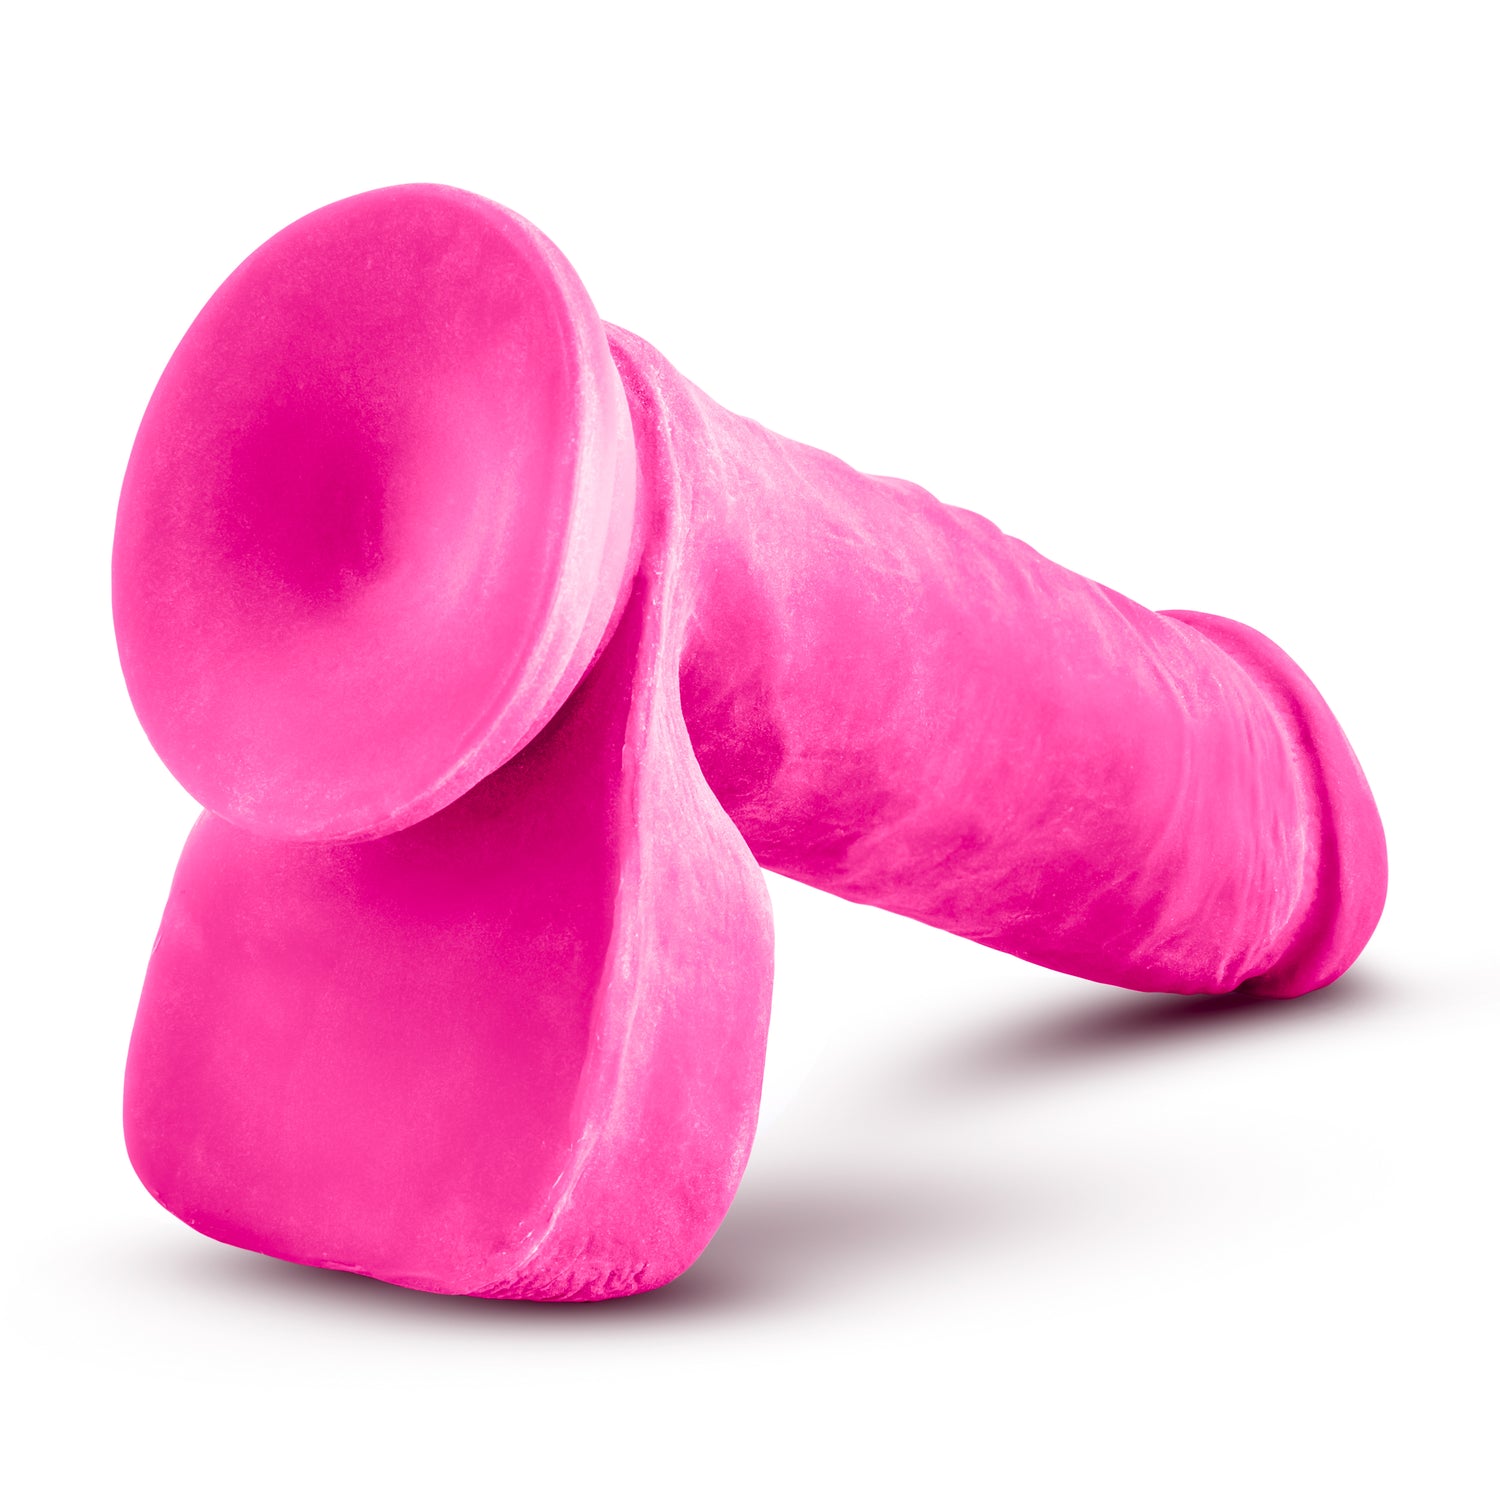 Au Naturel Bold Hero 8in Dildo Pink - Just for you desires